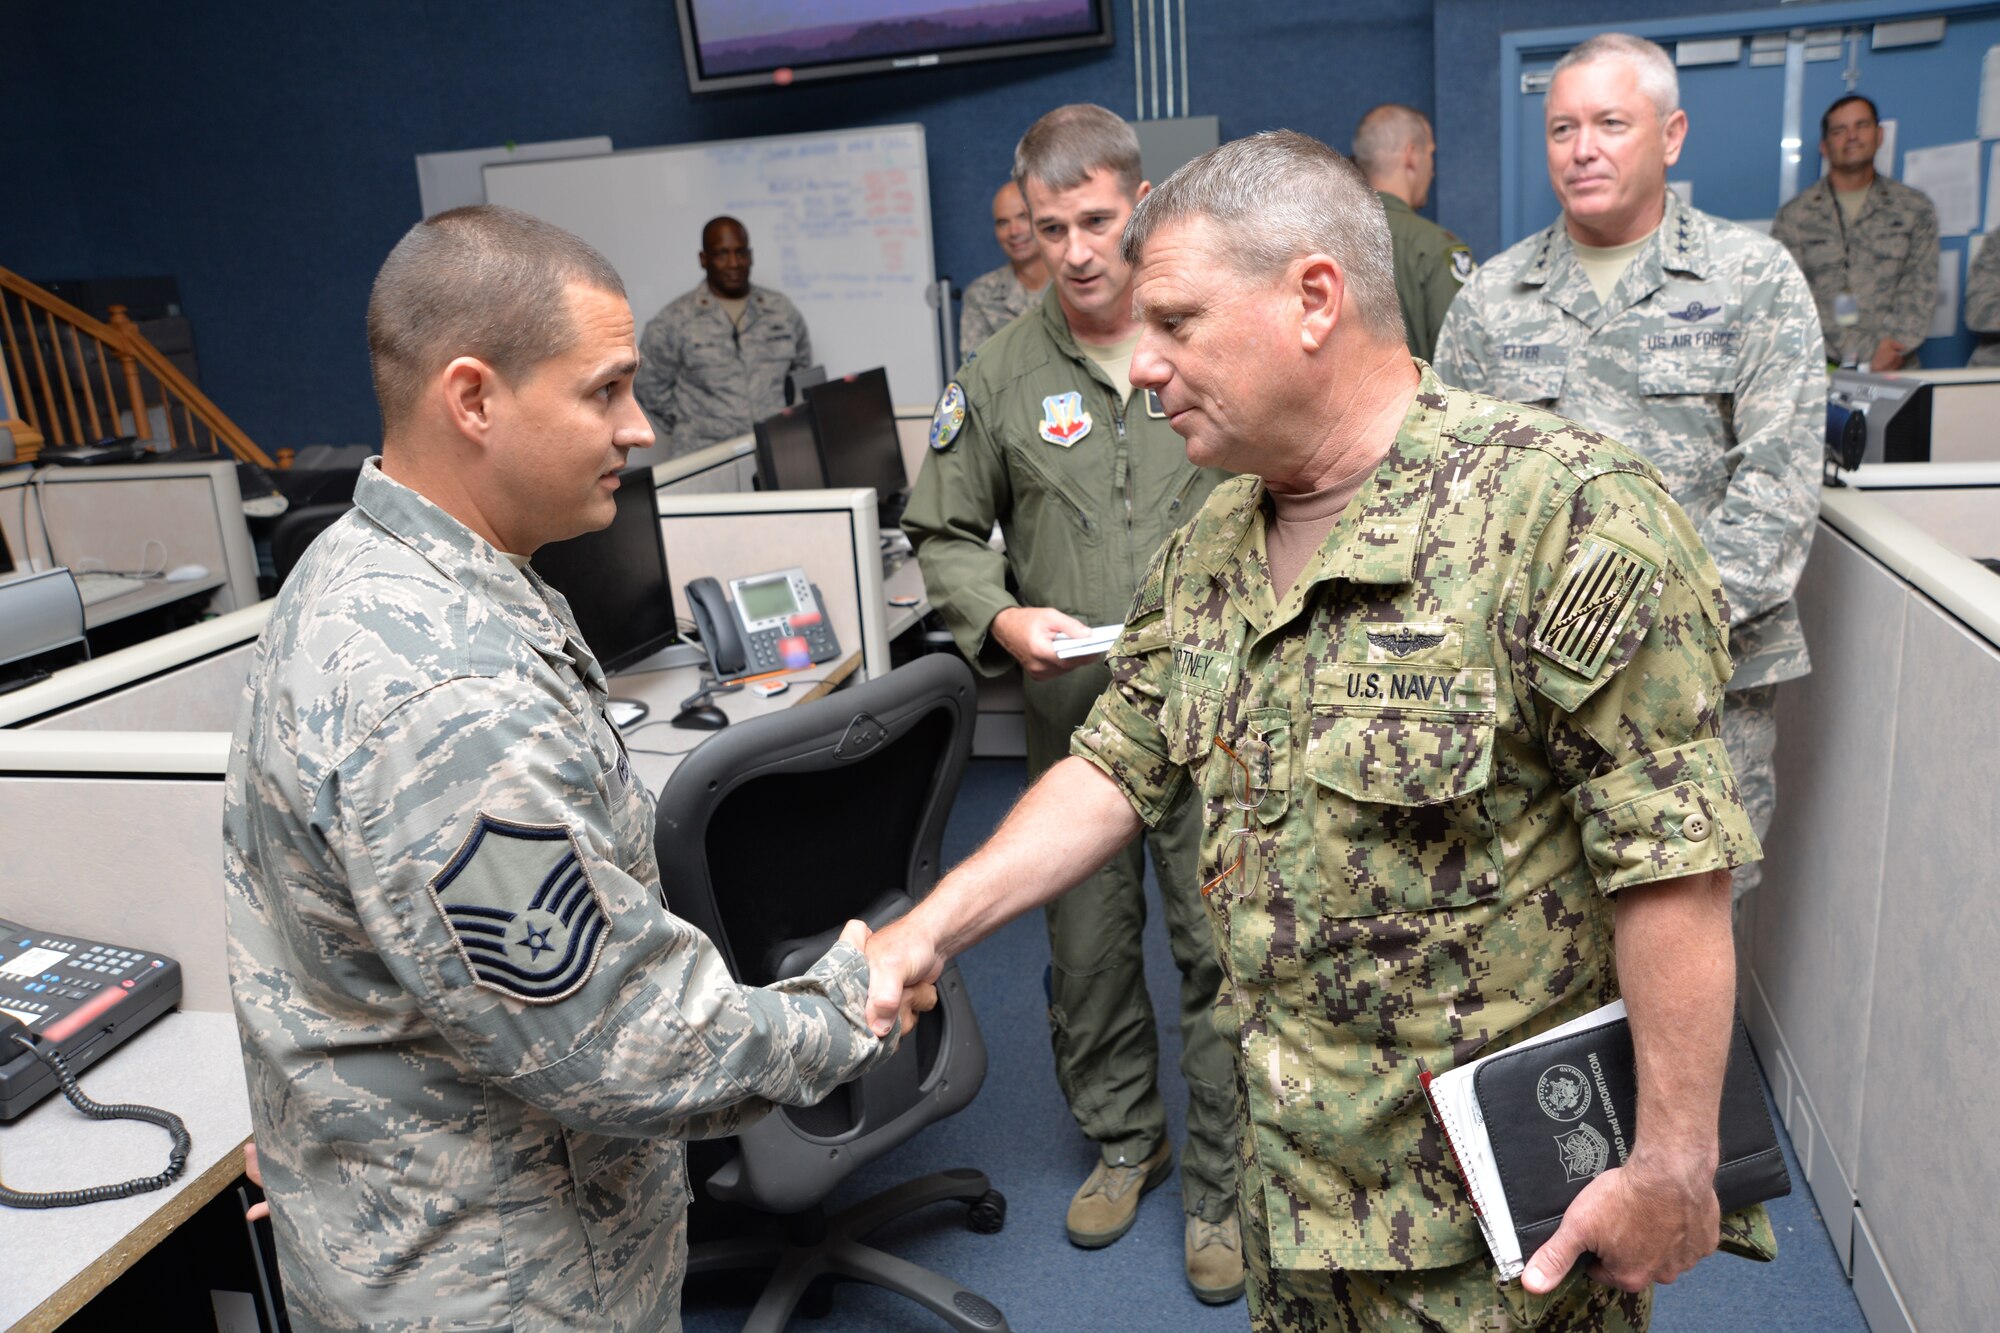 During a visit to the 601st Air Operations Center Aug. 12, Adm. Bill Gortney, Commander, North American Aerospace Defense Command-U.S. Northern Command, presented his coin to Master Sgt. Brad Weekley, 101st Air Communications Squadron, for outstanding duty performance.  Along with a tour and meetings at the 601st AOC, the admiral also met with senior Air Forces Northern leadership and received briefings about the status of current issues. (U.S. Air Force photo released/Capt. Jared Scott)